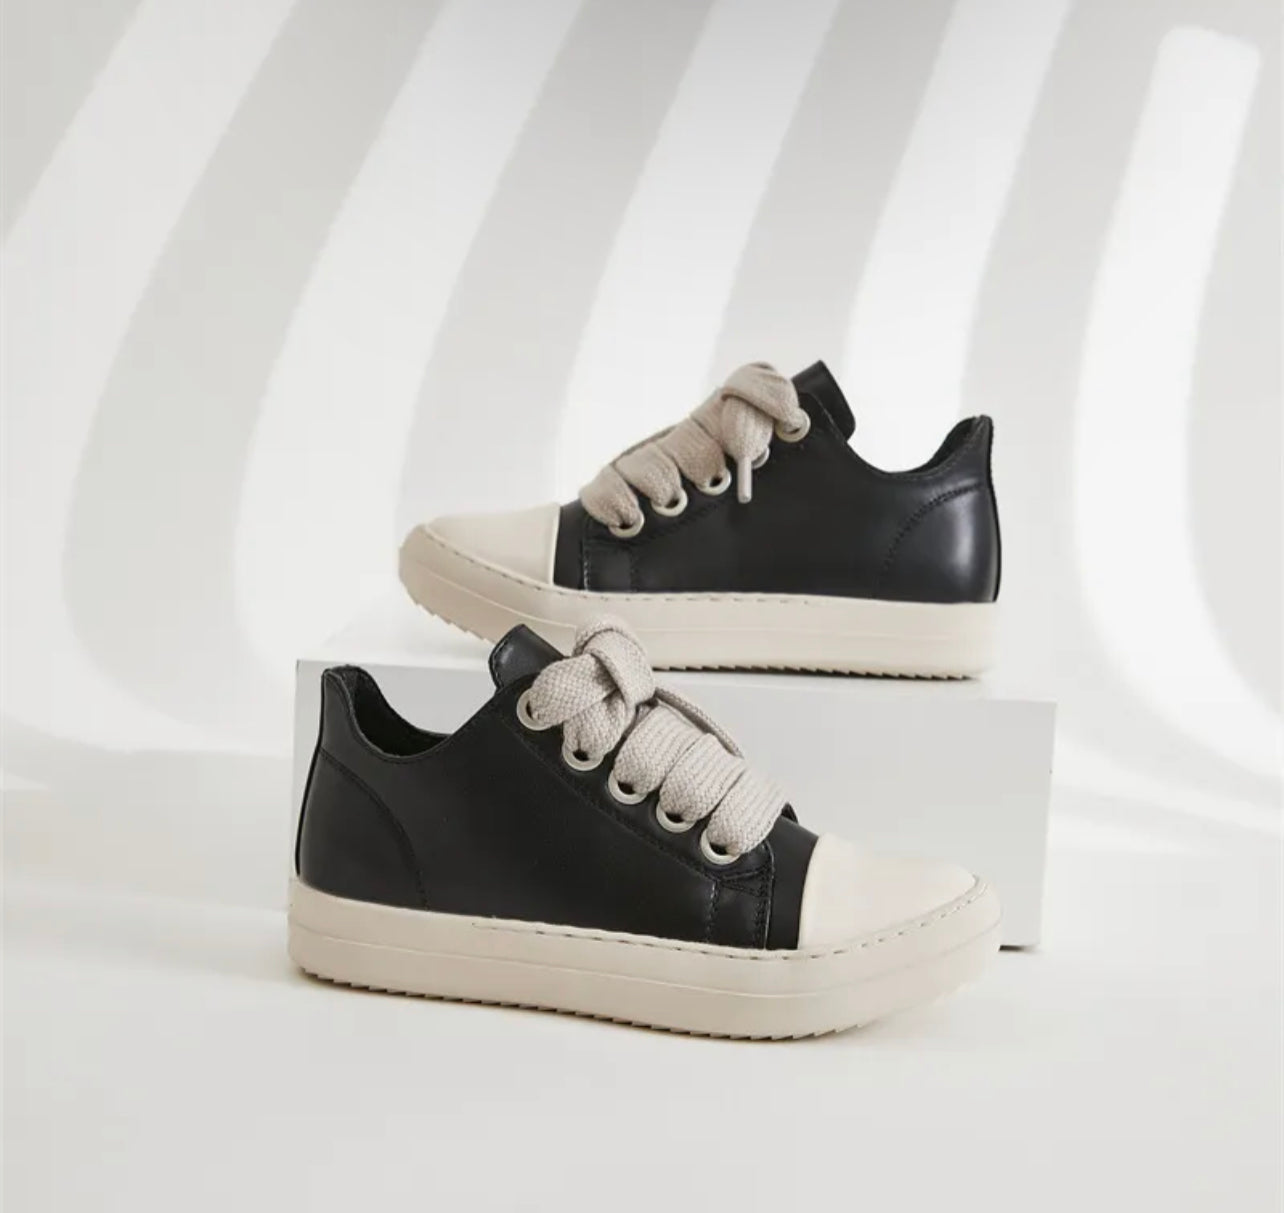 Low top fashion sneakers